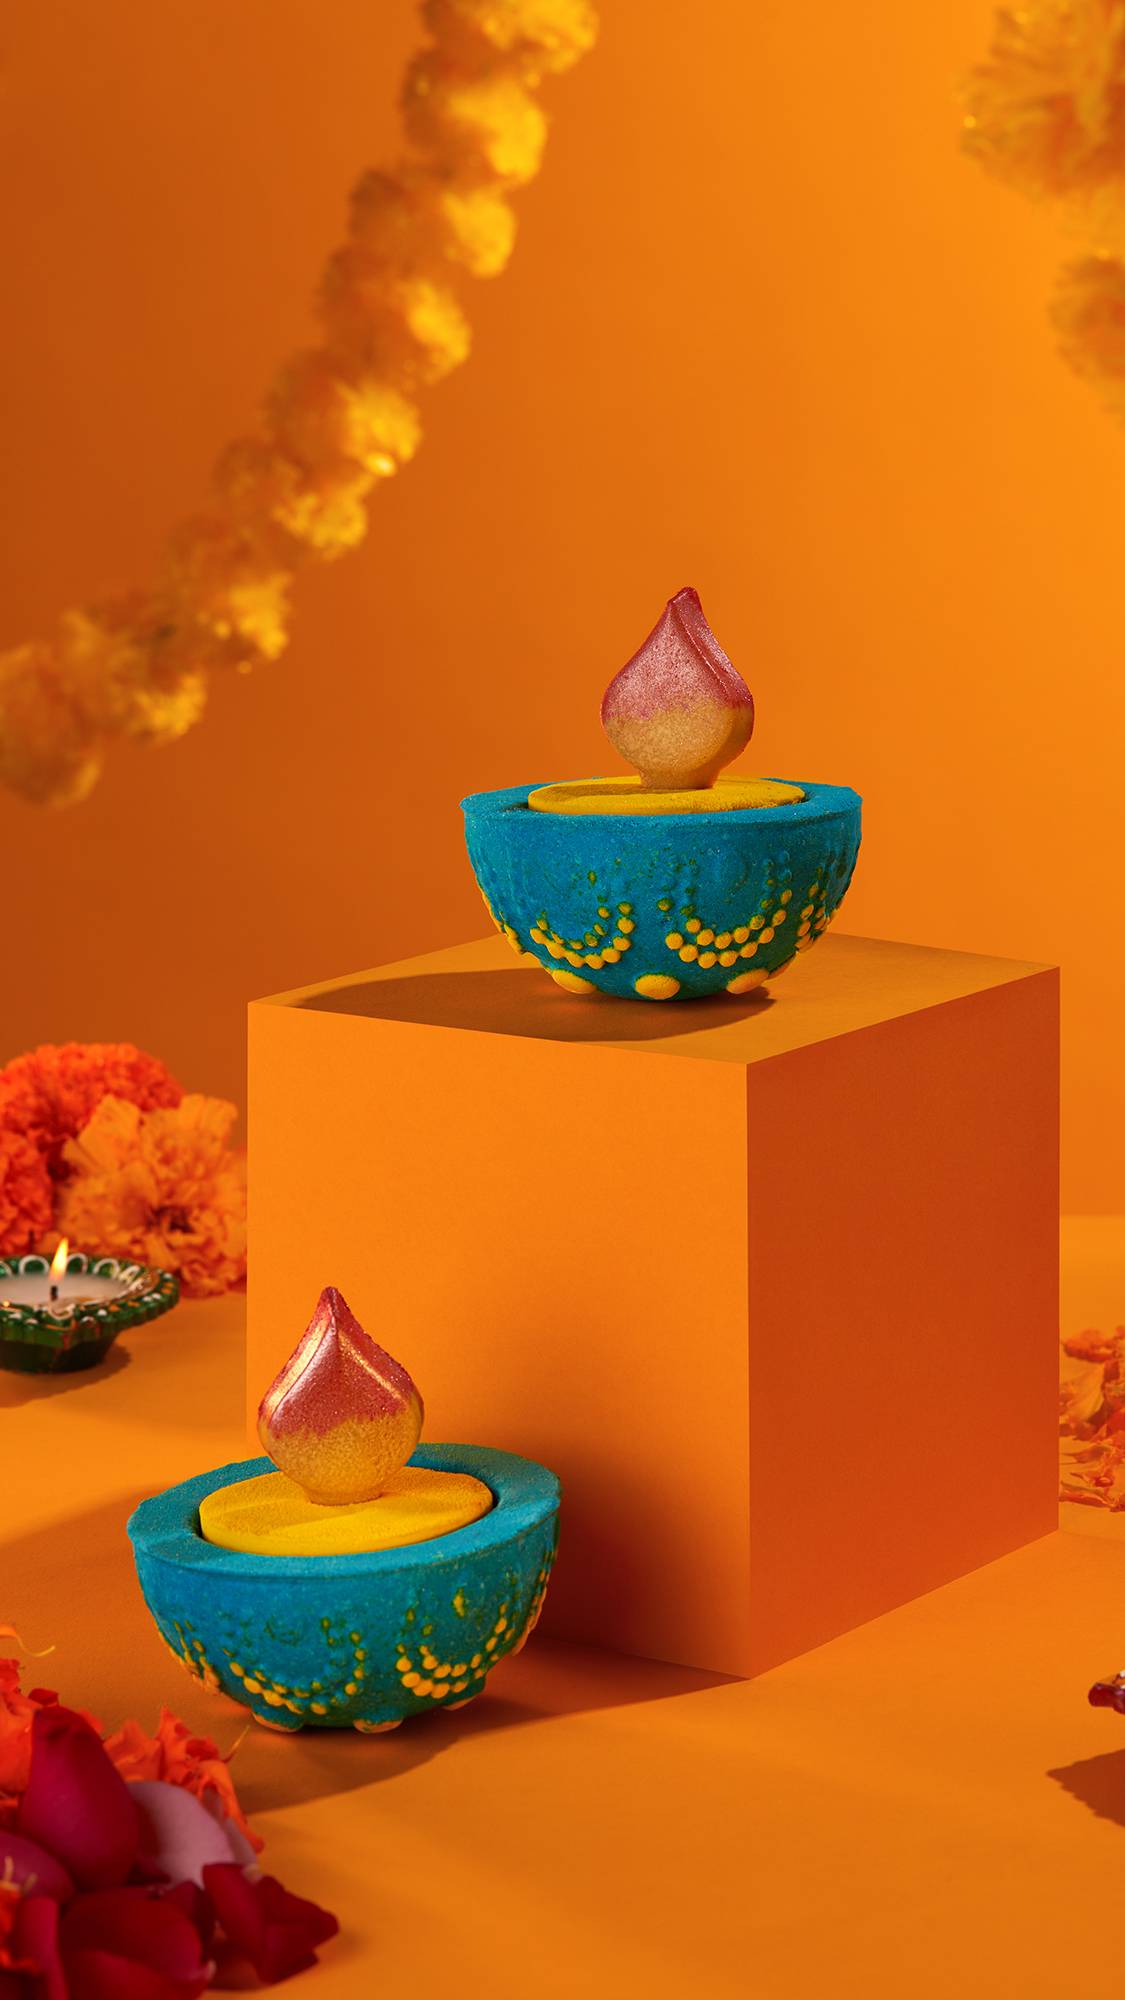 Image shows two Diya bath bombs placed around and on a pedestal. There is a vivid orange background with a marigold garland.